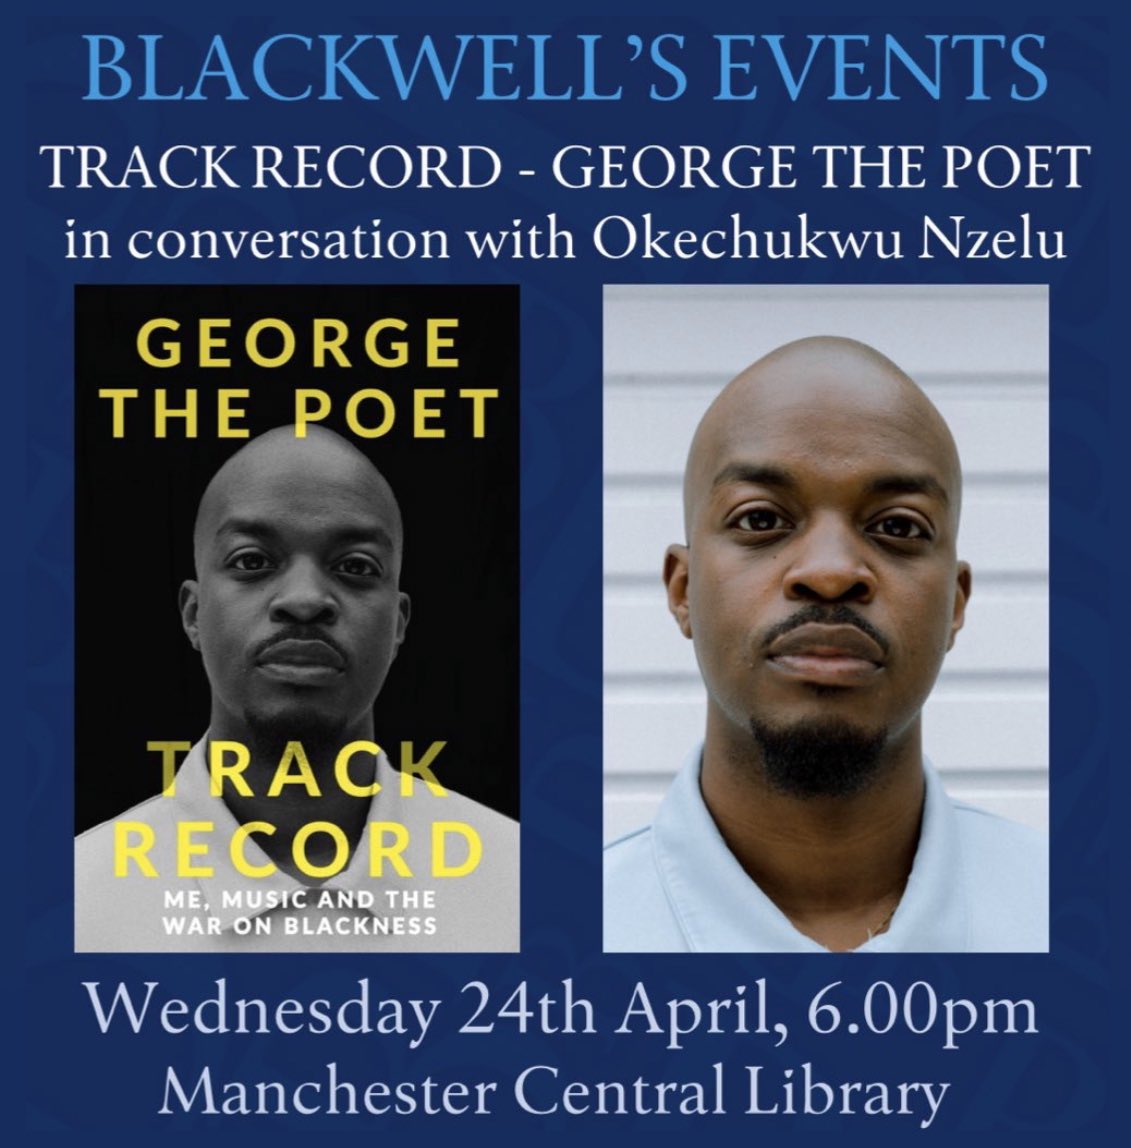 Just over one month until we welcome @GeorgeThePoet to Manchester for the launch of his groundbreaking new memoir TRACK RECORD: ME, MUSIC AND THE WAR ON BLACKNESS. George will be in conversation with @NzeluWrites. Tickets start from £8 and are available via the link below.